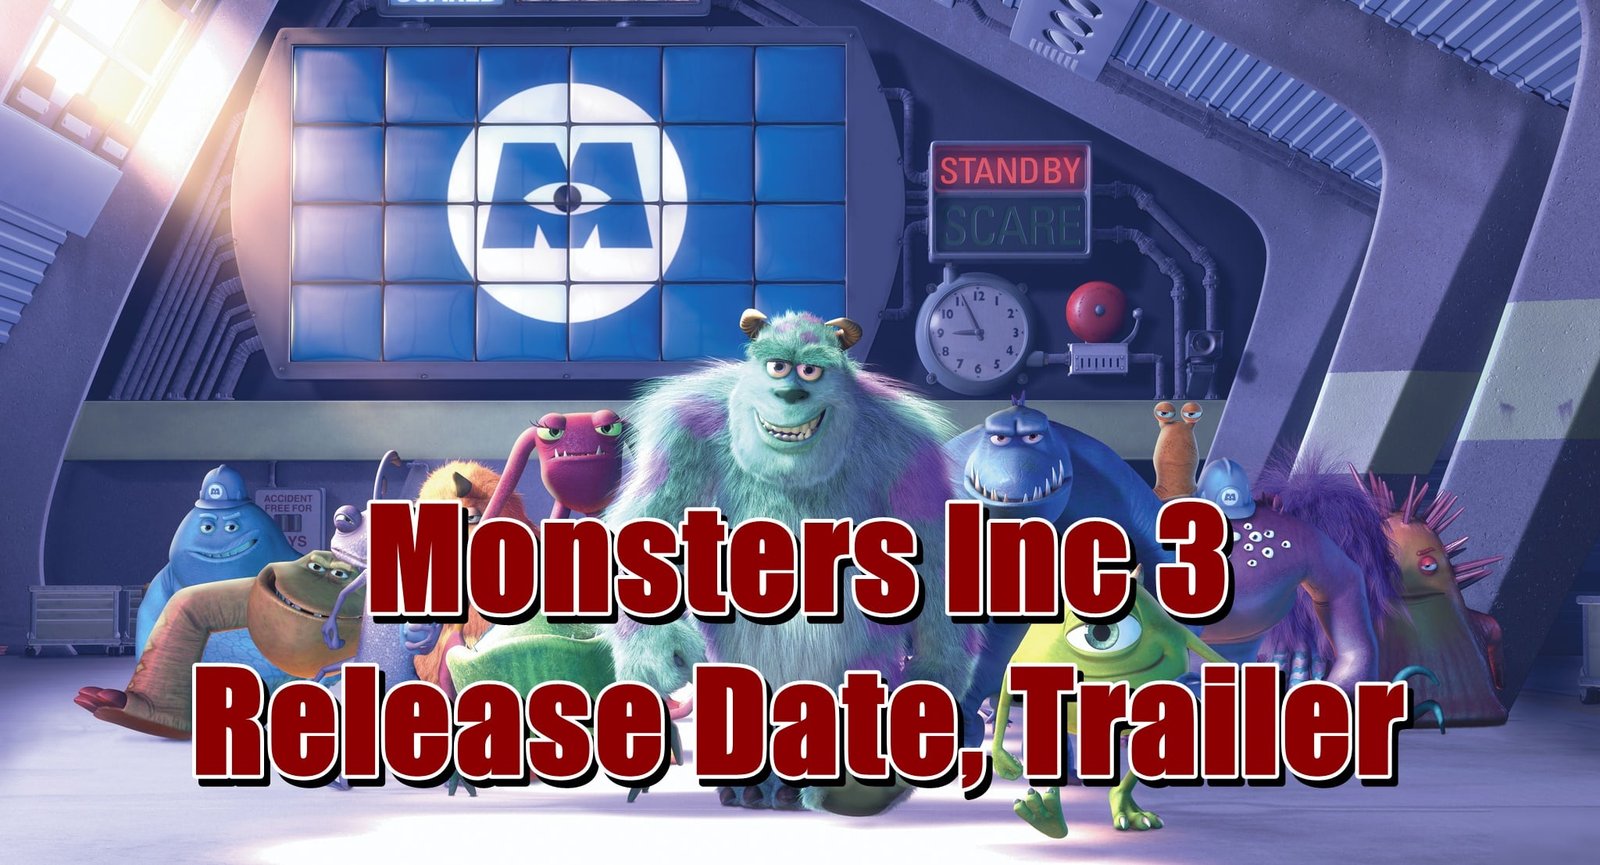 Monsters Inc 3 Release Date, Trailer - Is it canceled